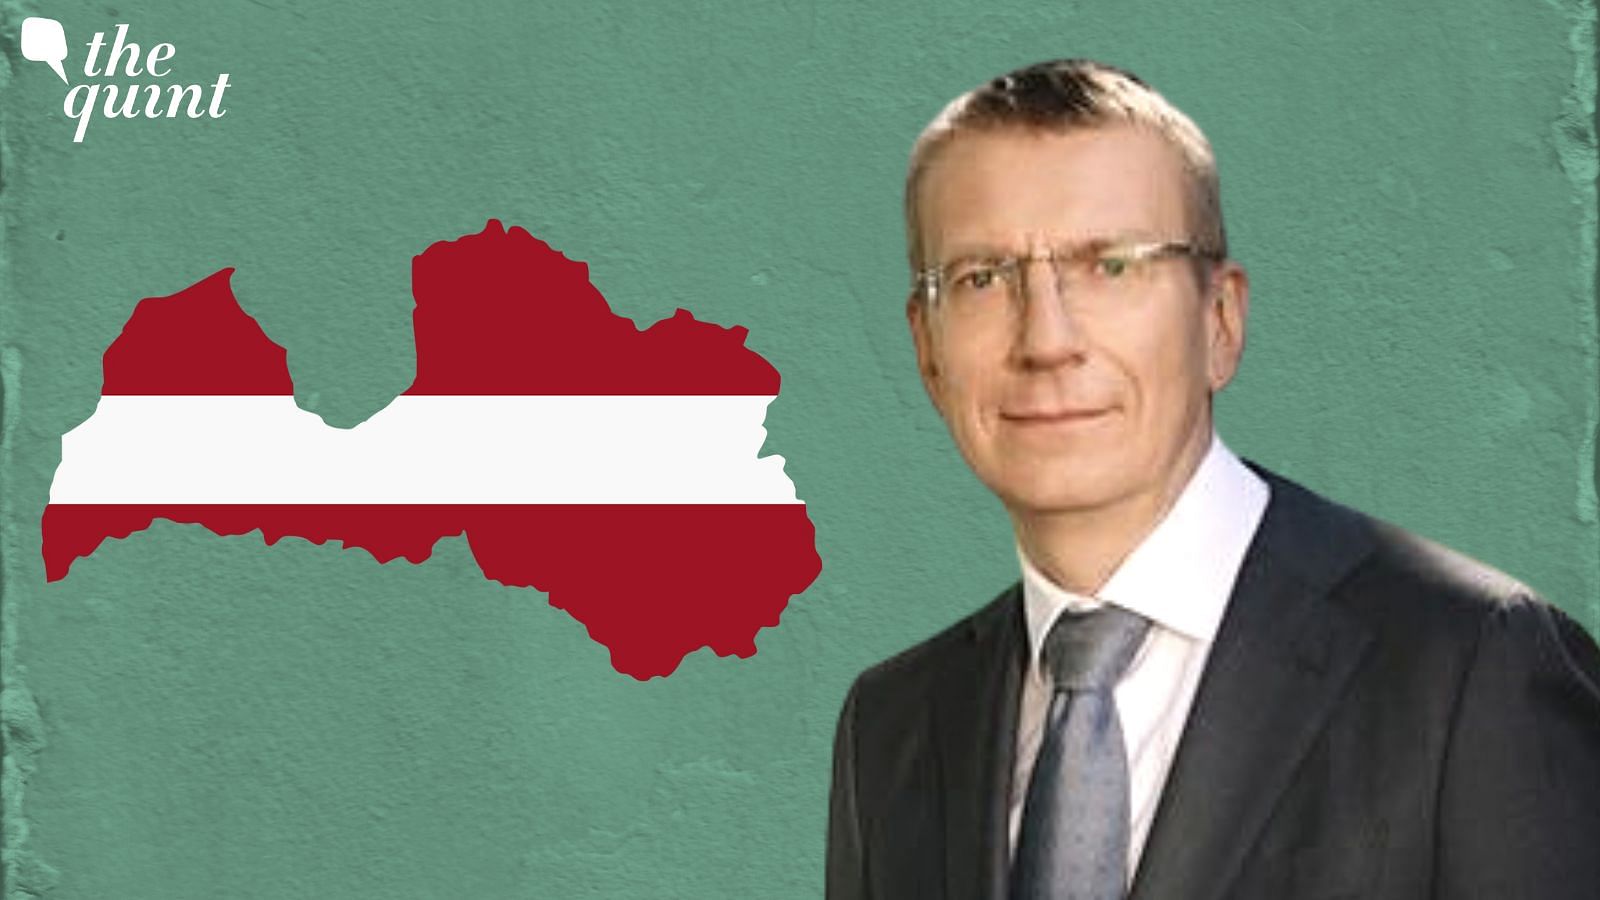 <div class="paragraphs"><p>After the elections, Rinkēvičs tweeted that he was "honoured and humbled to be elected as President of the Republic of Latvia."</p></div>